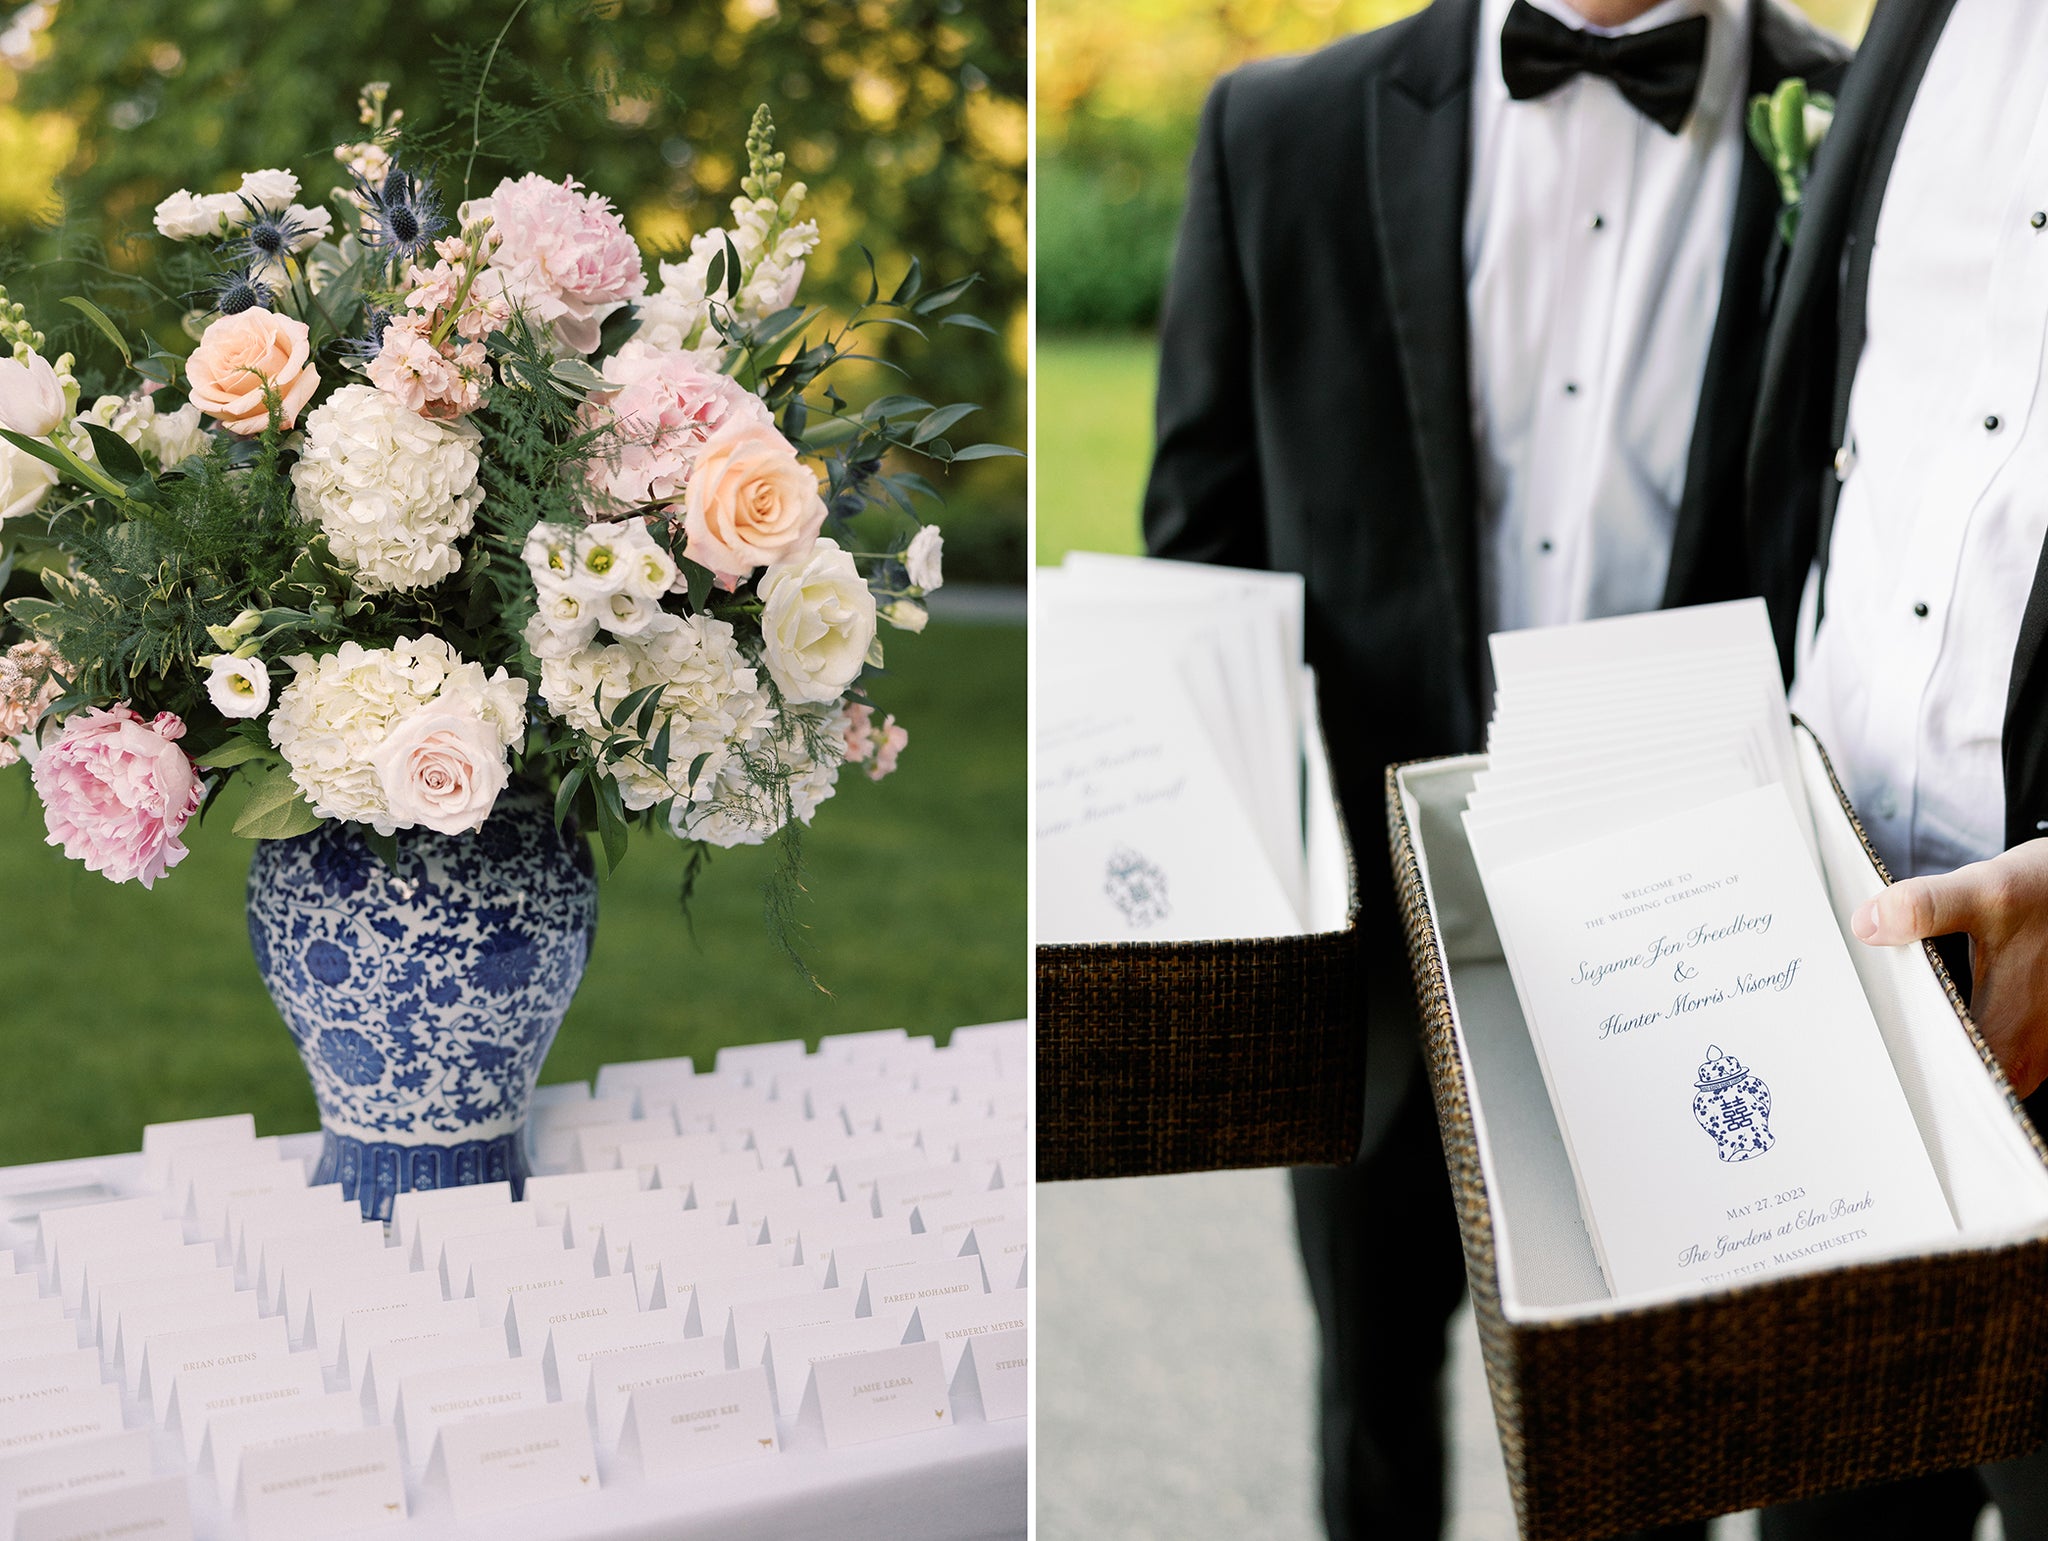 Suzie & Hunter's wedding escort card table with pale pink bouquet in a blue and white ginger jar with a double happiness on it; second photo of the ushers holding ceremony programs featuring a ginger jar with double happiness design